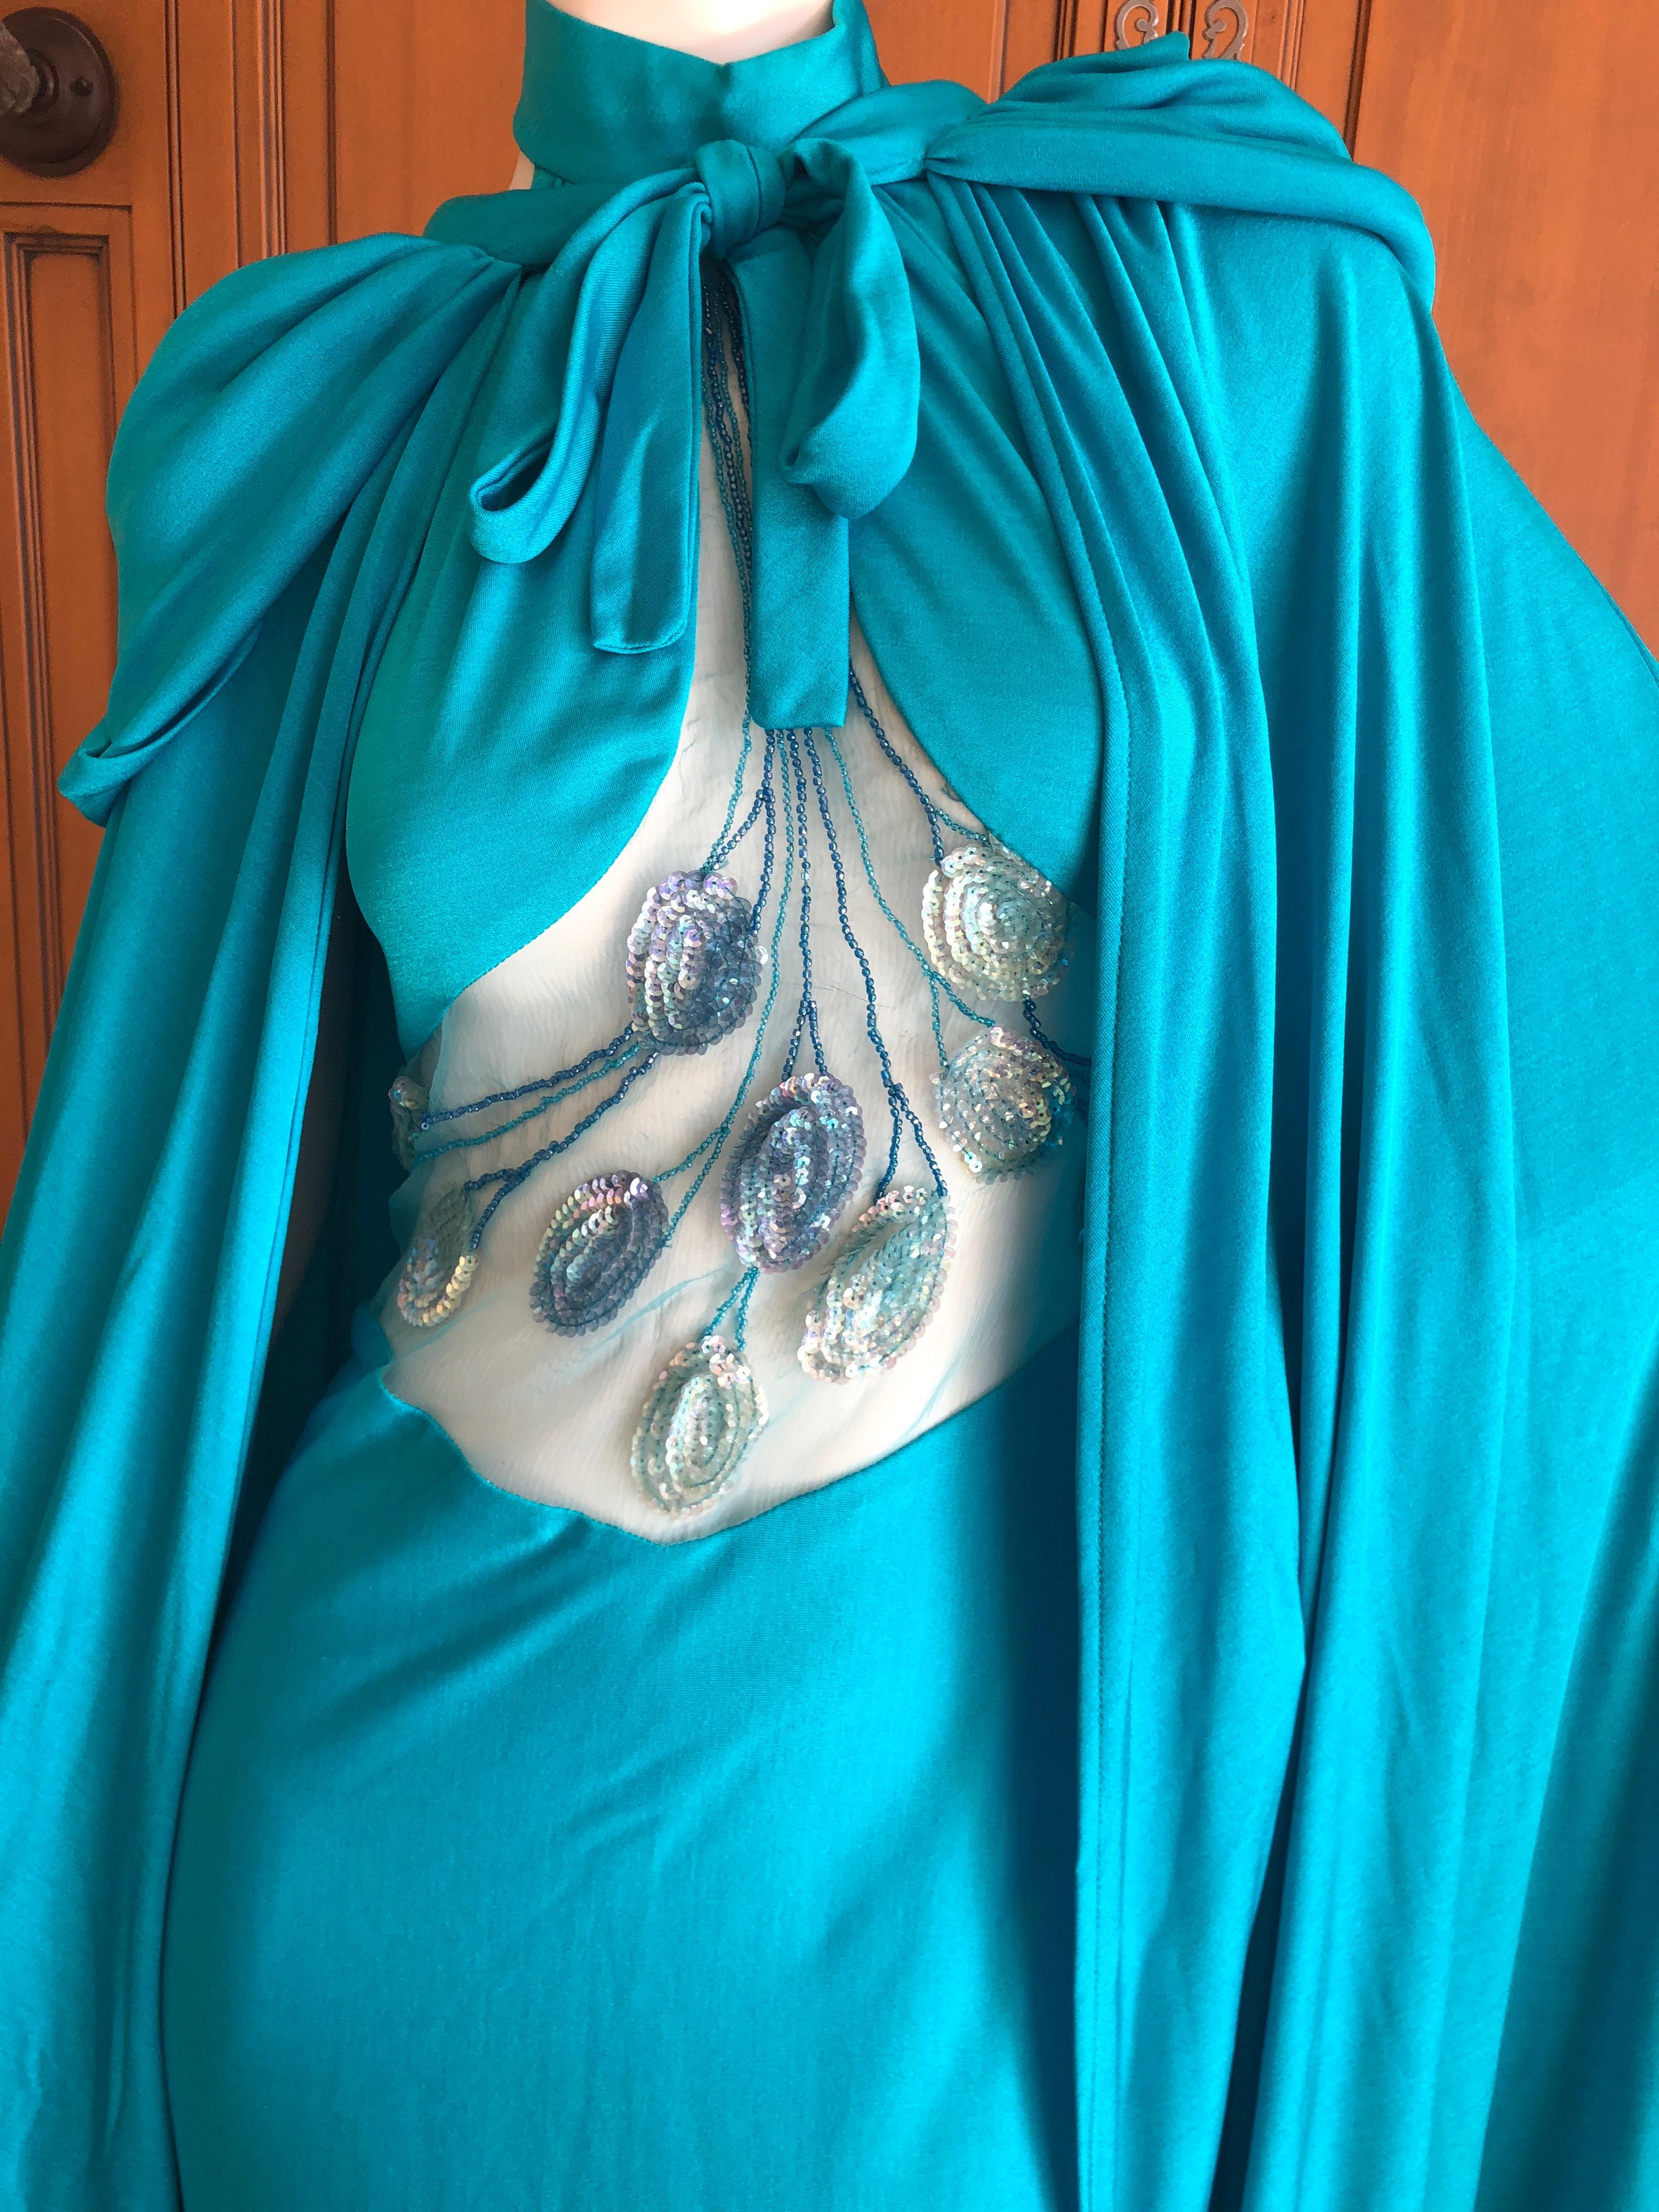 Loris Azzaro Couture 1970s Sheer Sequin Accented Turquoise Blue Dress and Cape 5